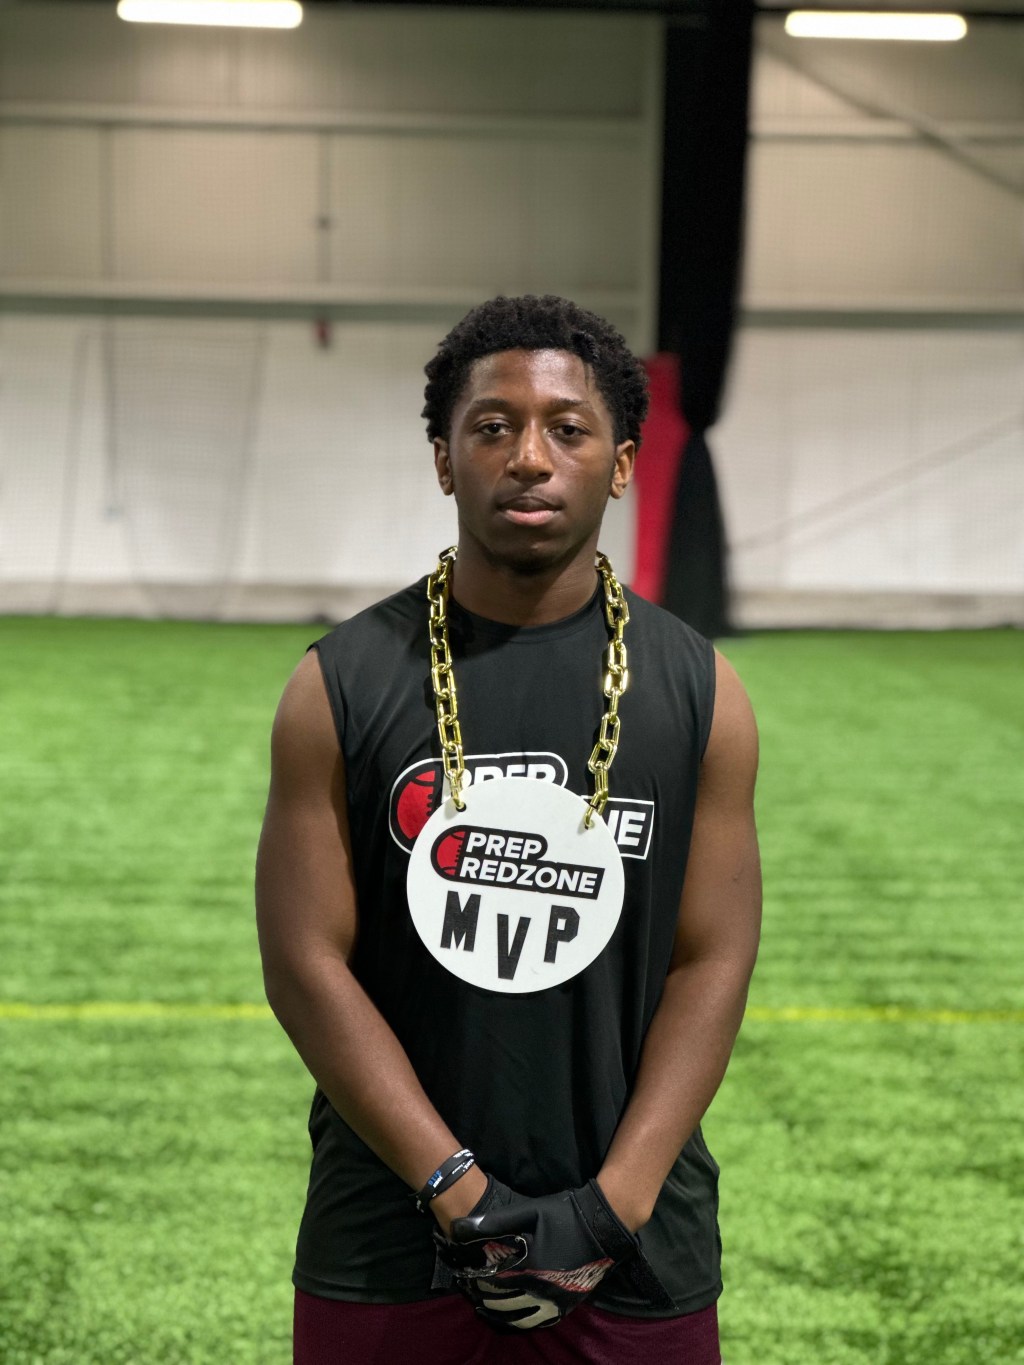 New England Prospect Tour "Running Back" Top Performers: